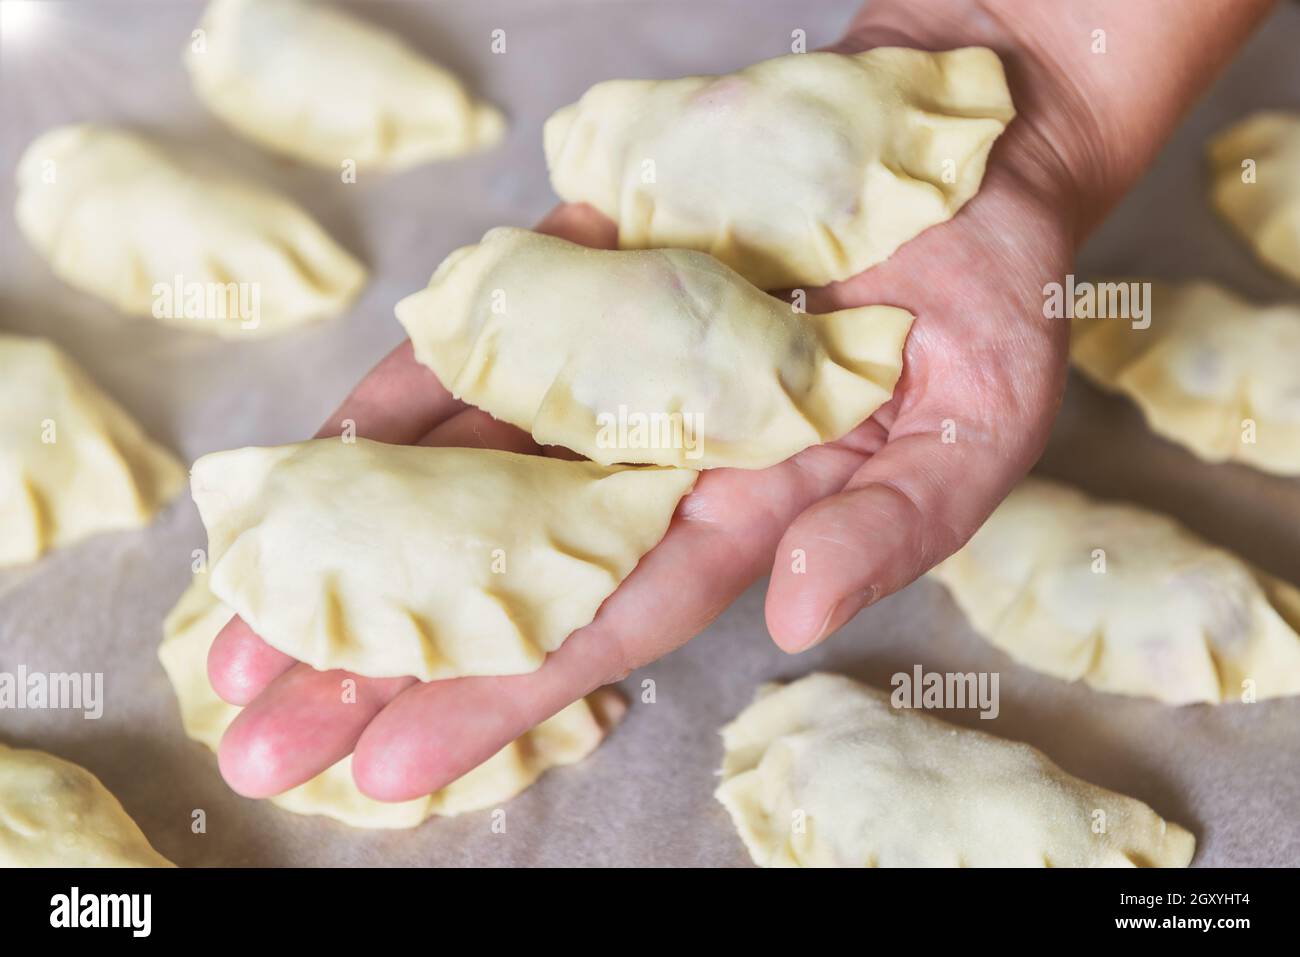 Making dumplings filled with sour cherry with sugar, hand holding freshly made dumplings Stock Photo